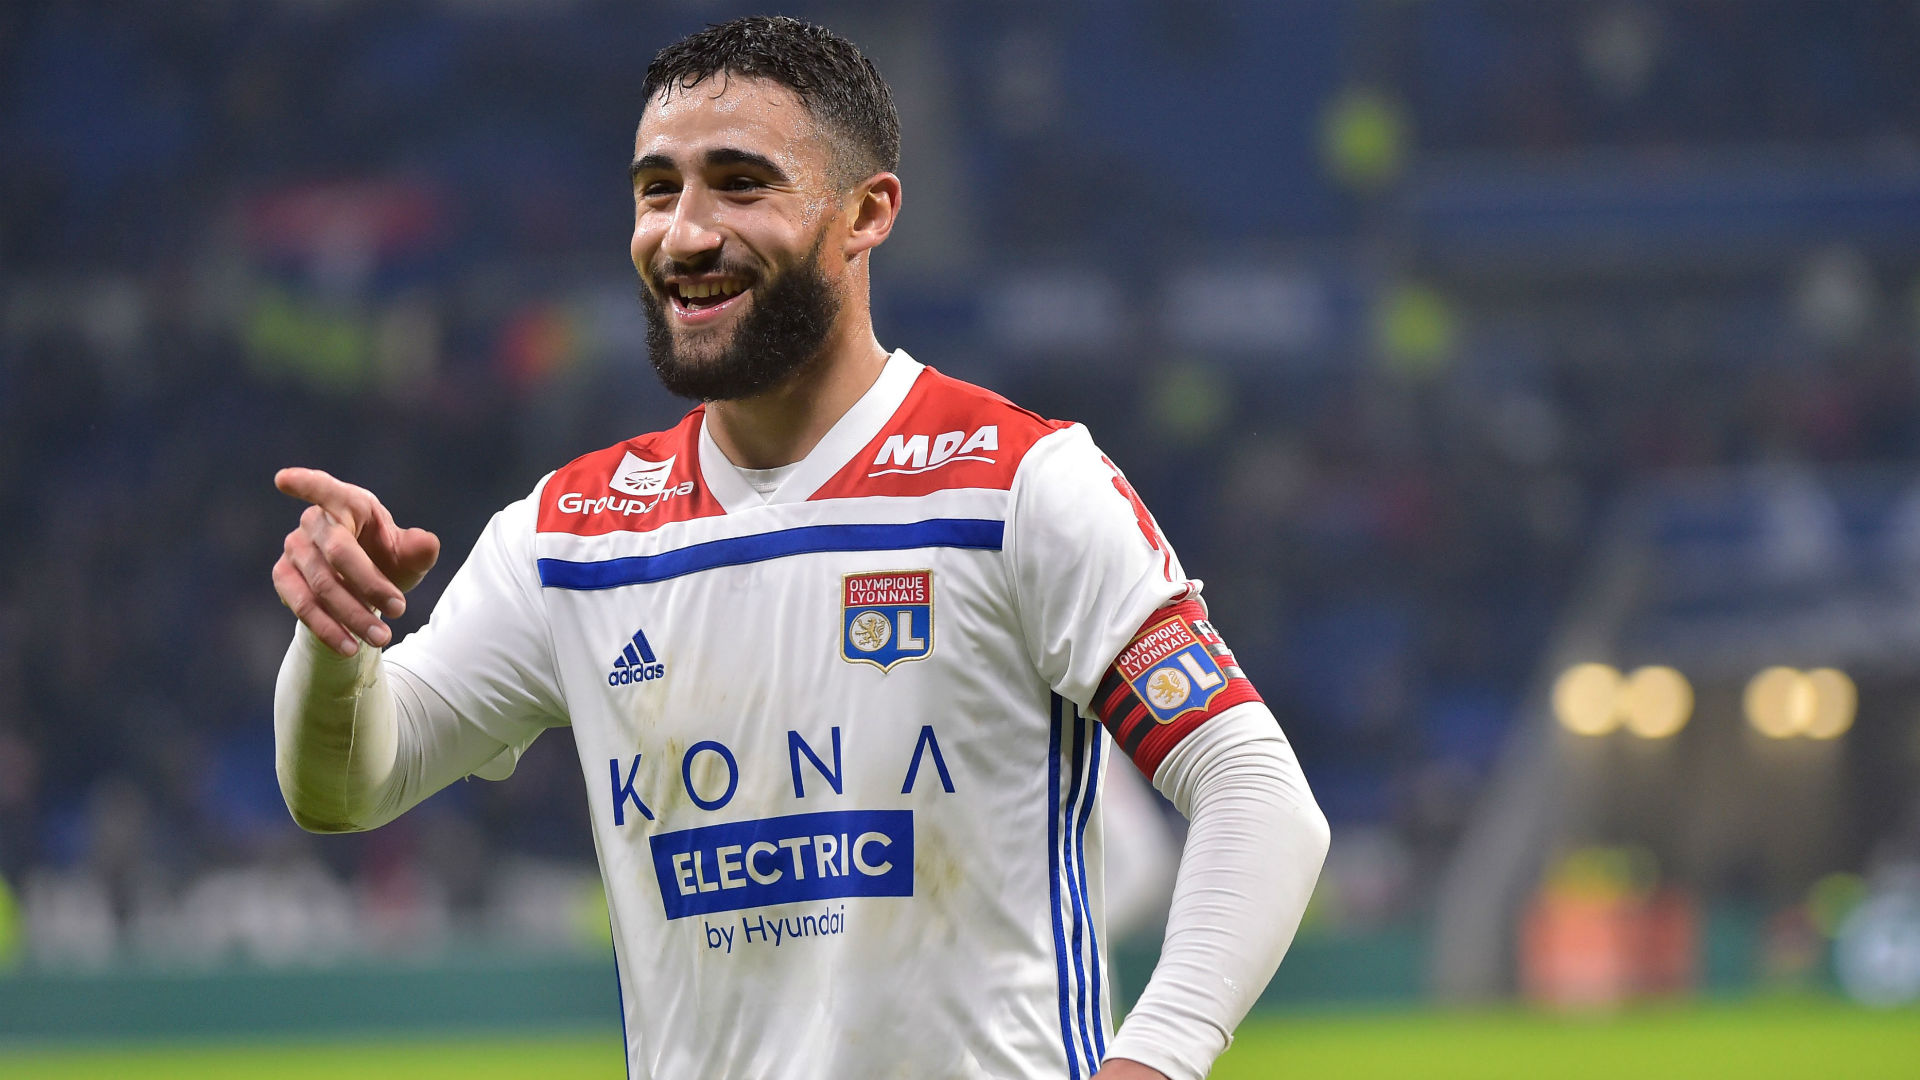 Transfer news: Nabil Fekir set for Real Betis medical ahead of €20m switch from Lyon | Goal.com